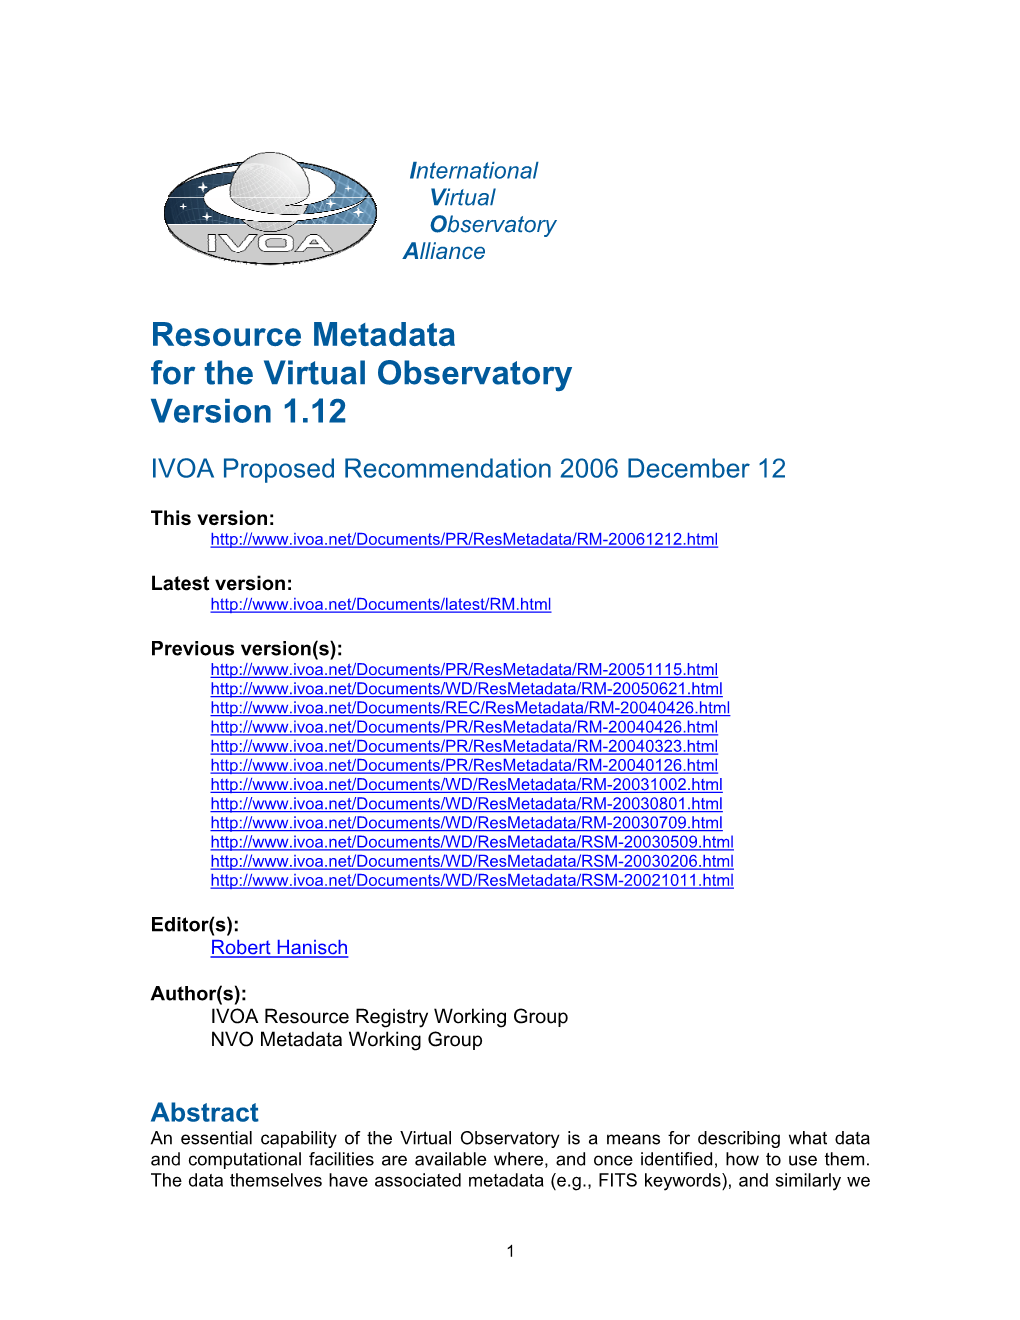 Resource and Service Metadata for the Virtual Observatory